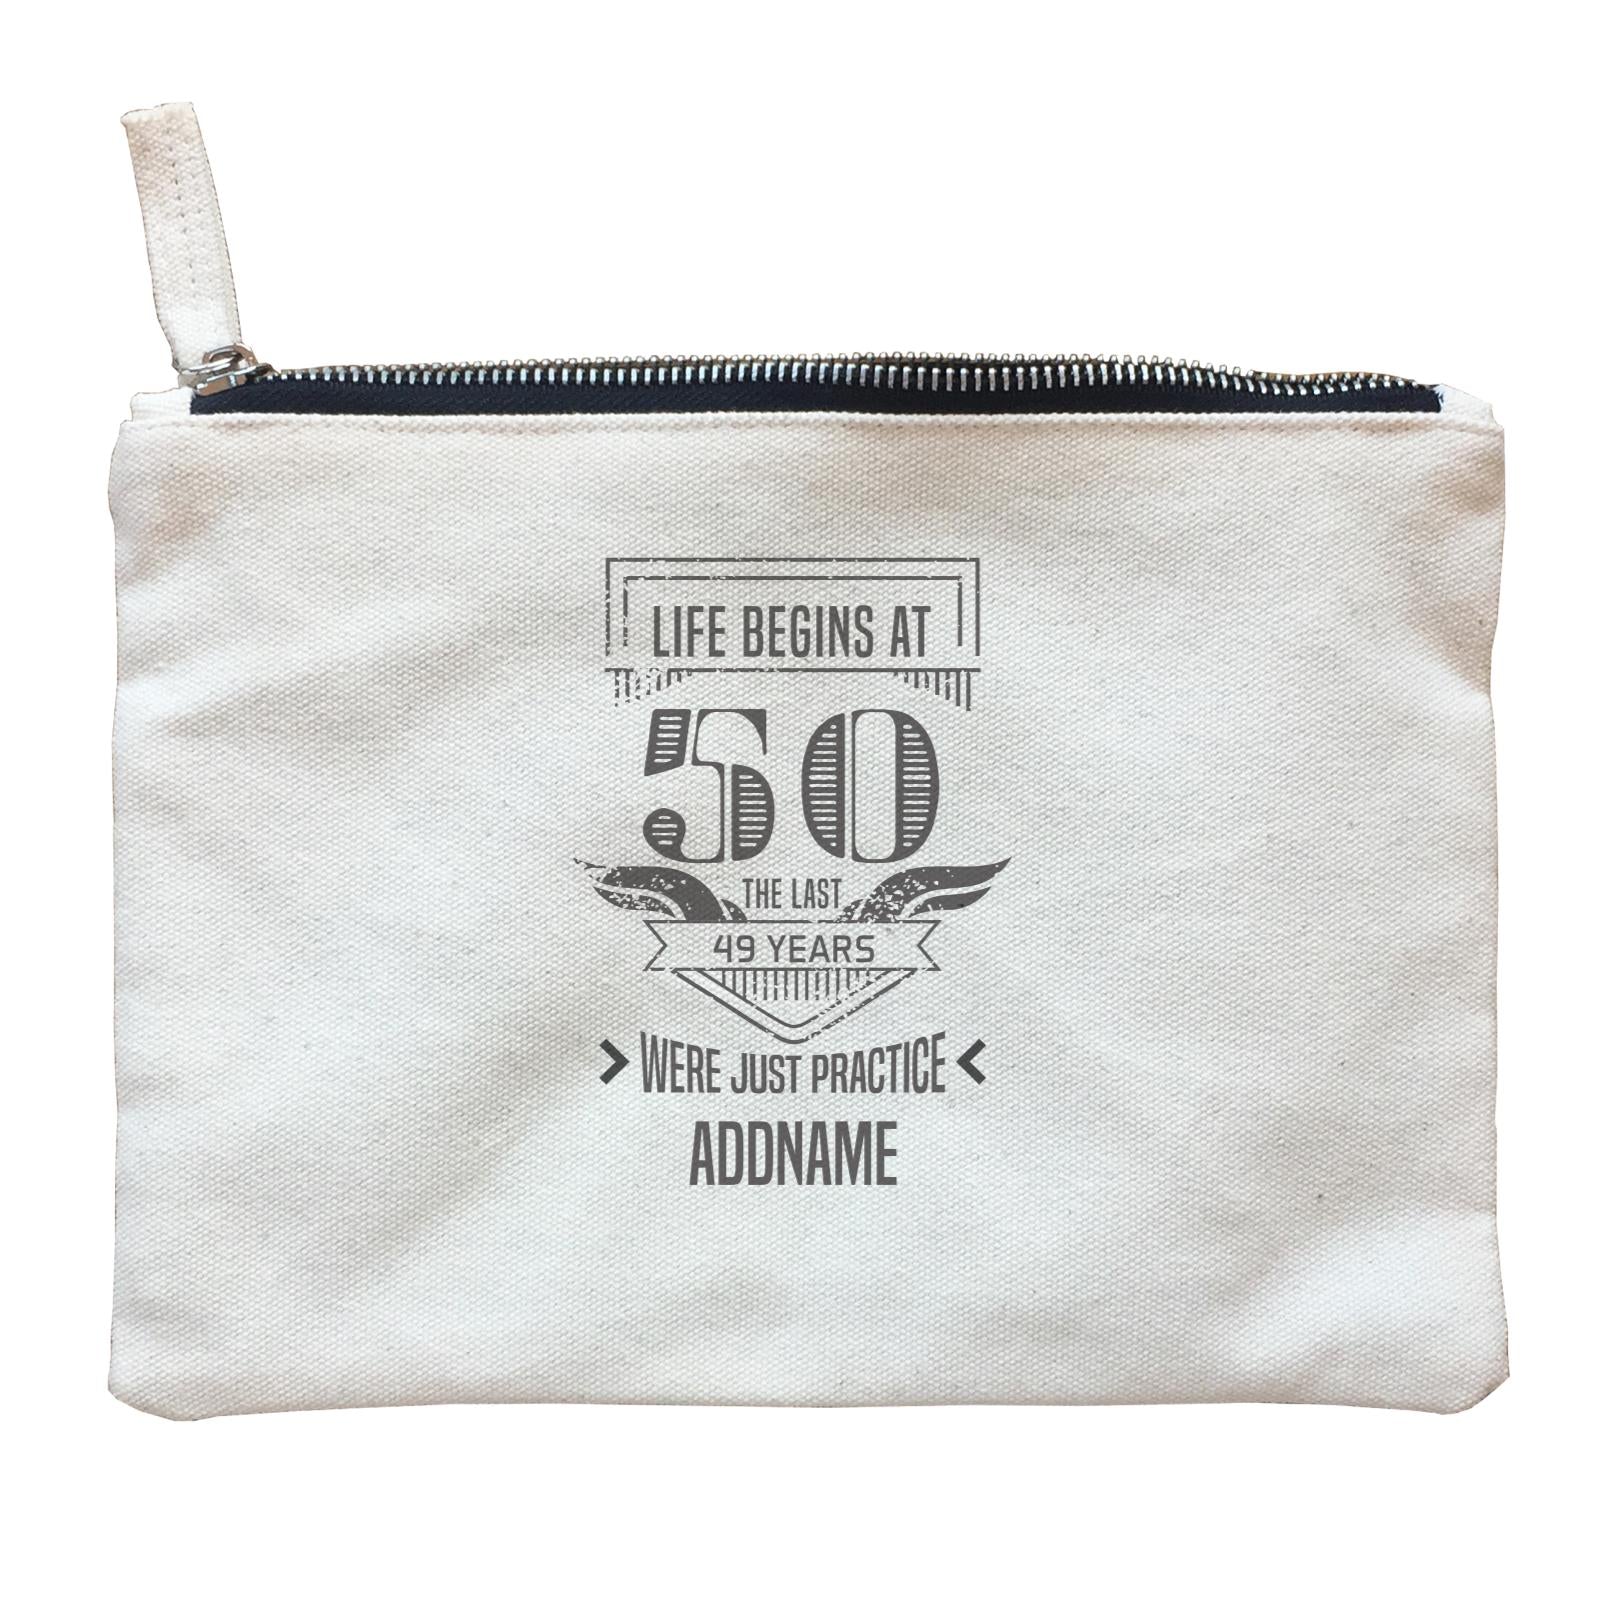 Personalize It Birthyear Life Begins At Were Just Practice with Addname and Add Year Zipper Pouch